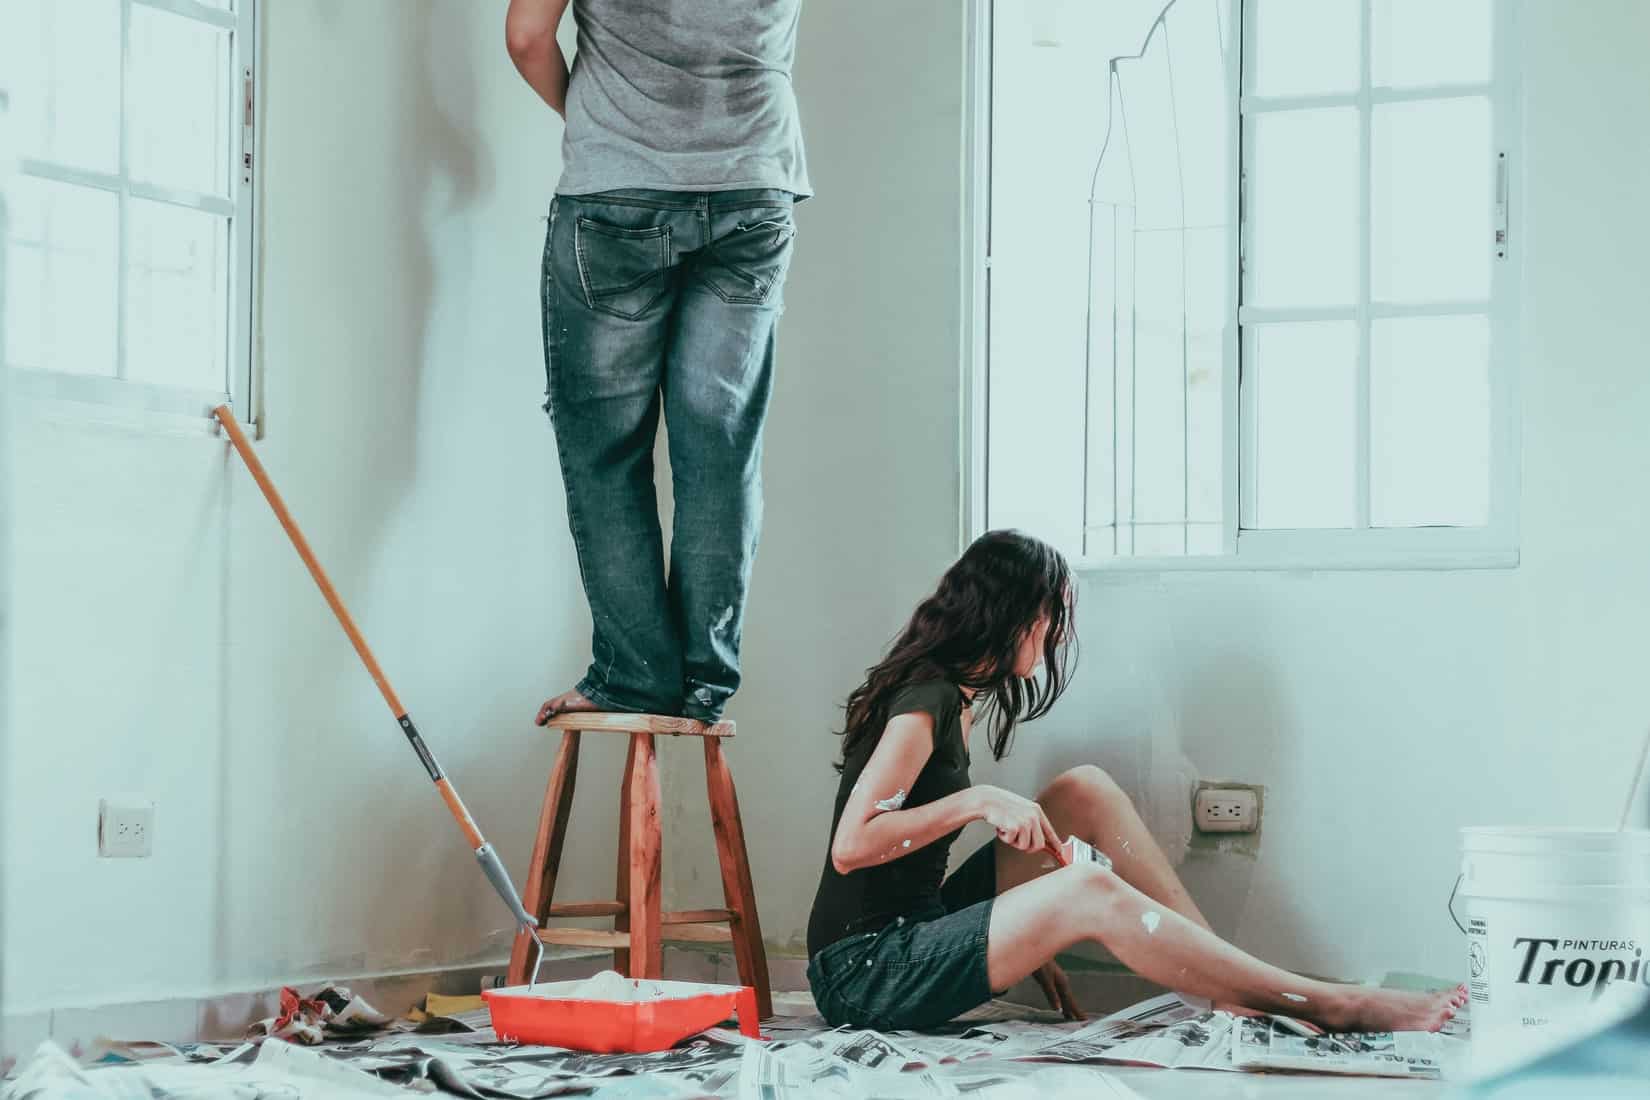 Man and woman decorating a room